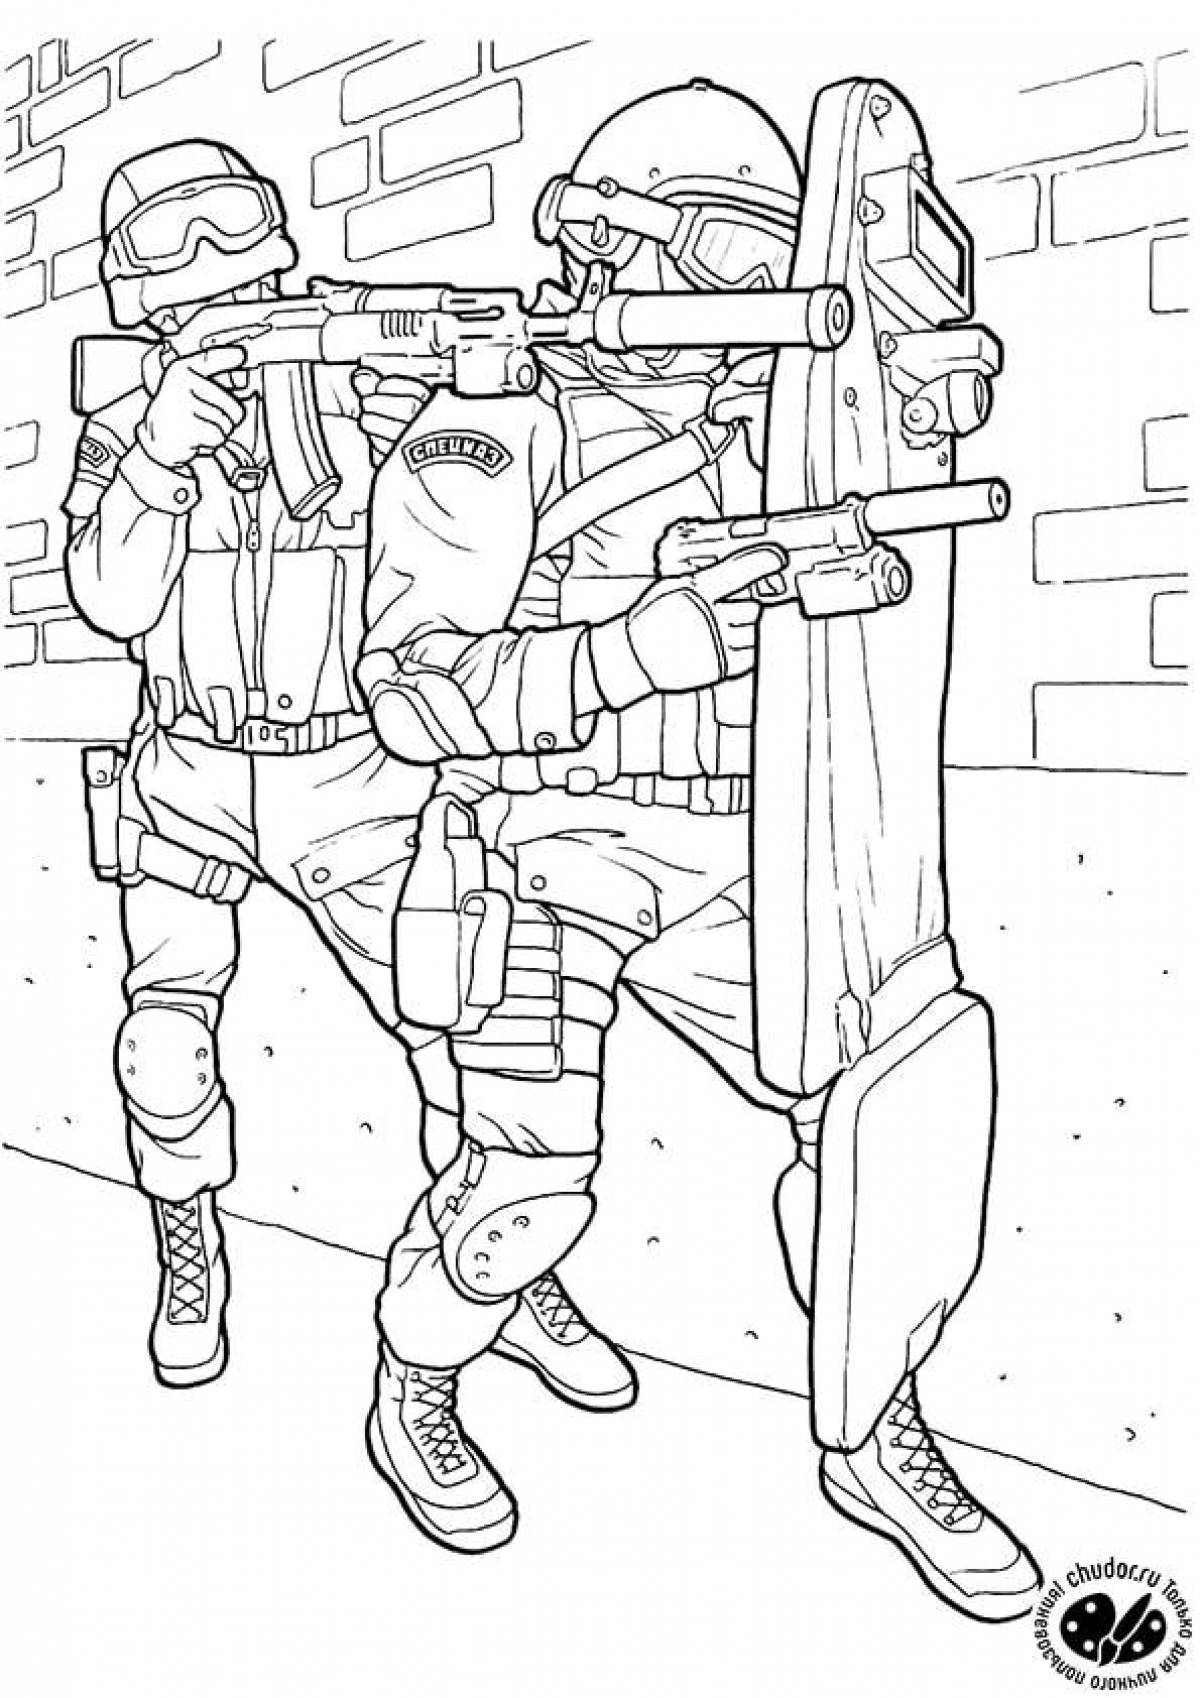 Spetsnaz bright coloring